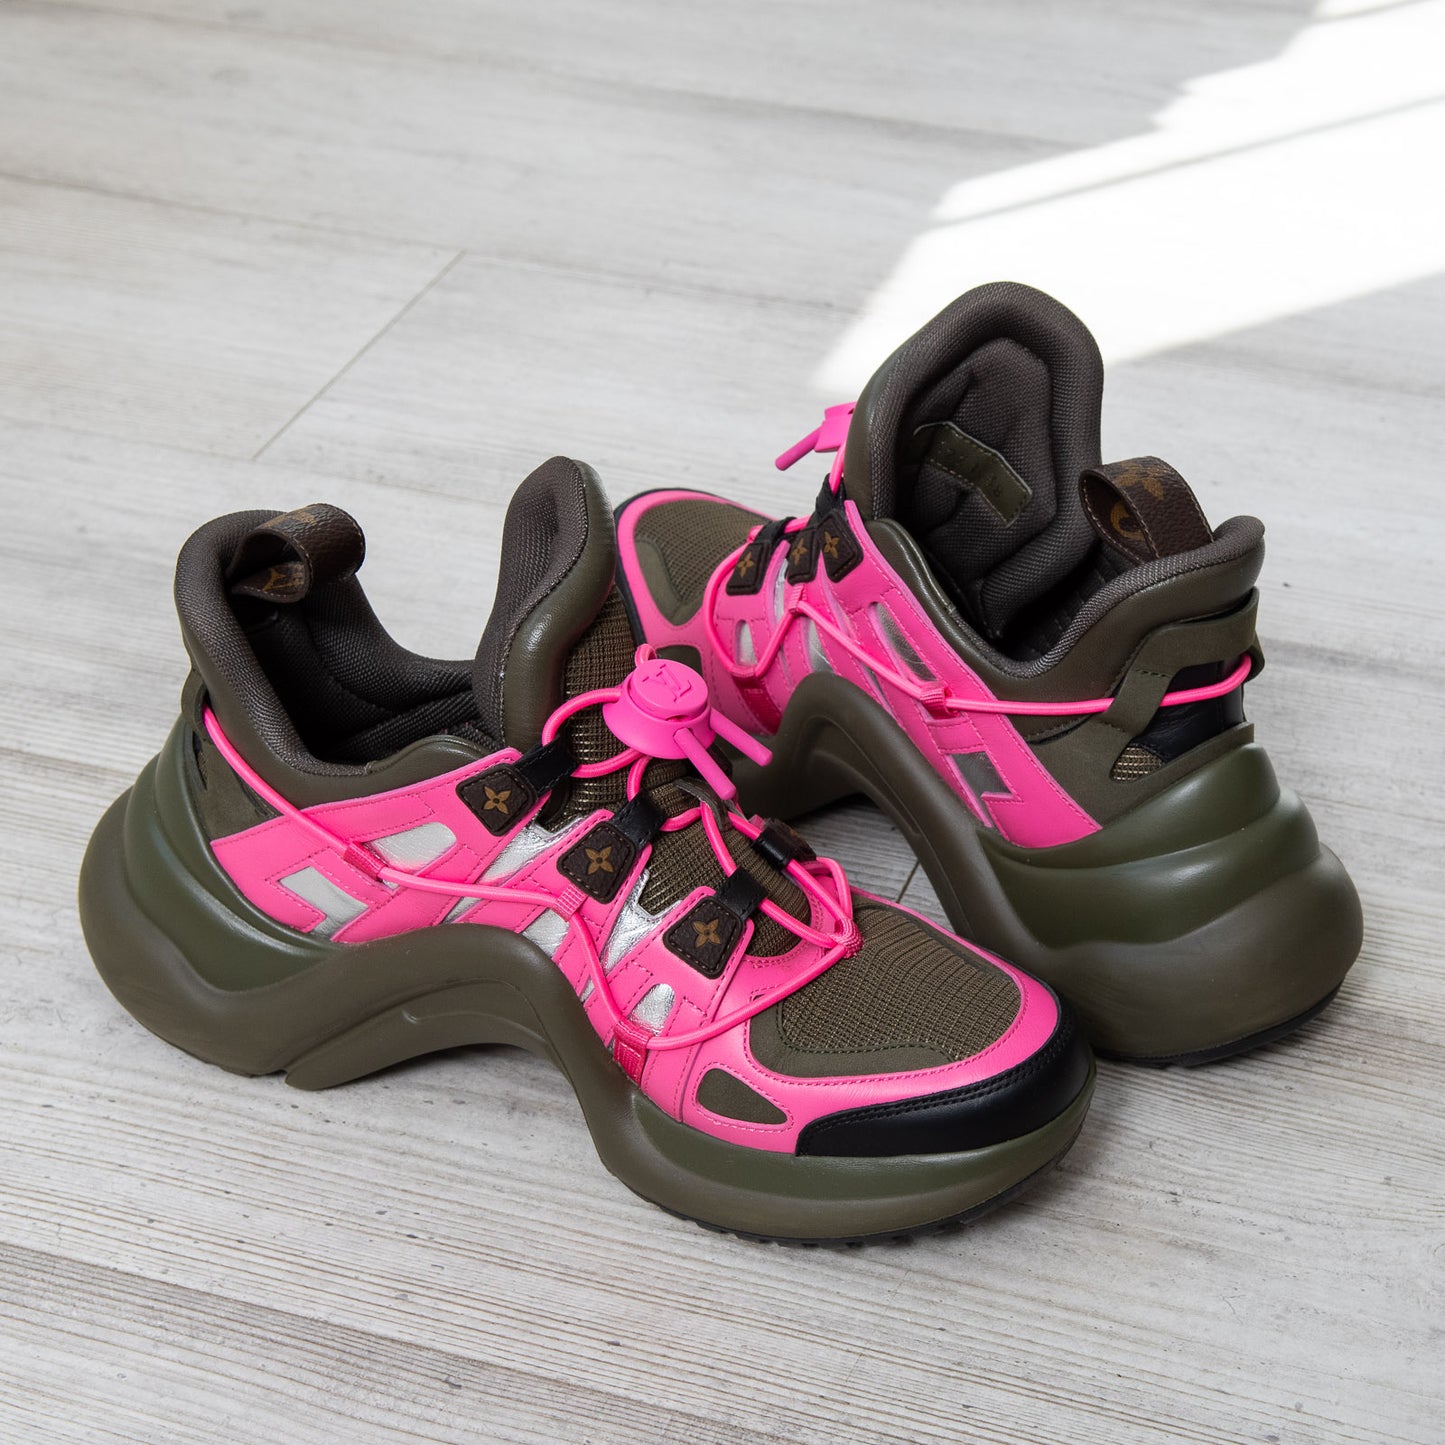 louis vuitton pink trainers